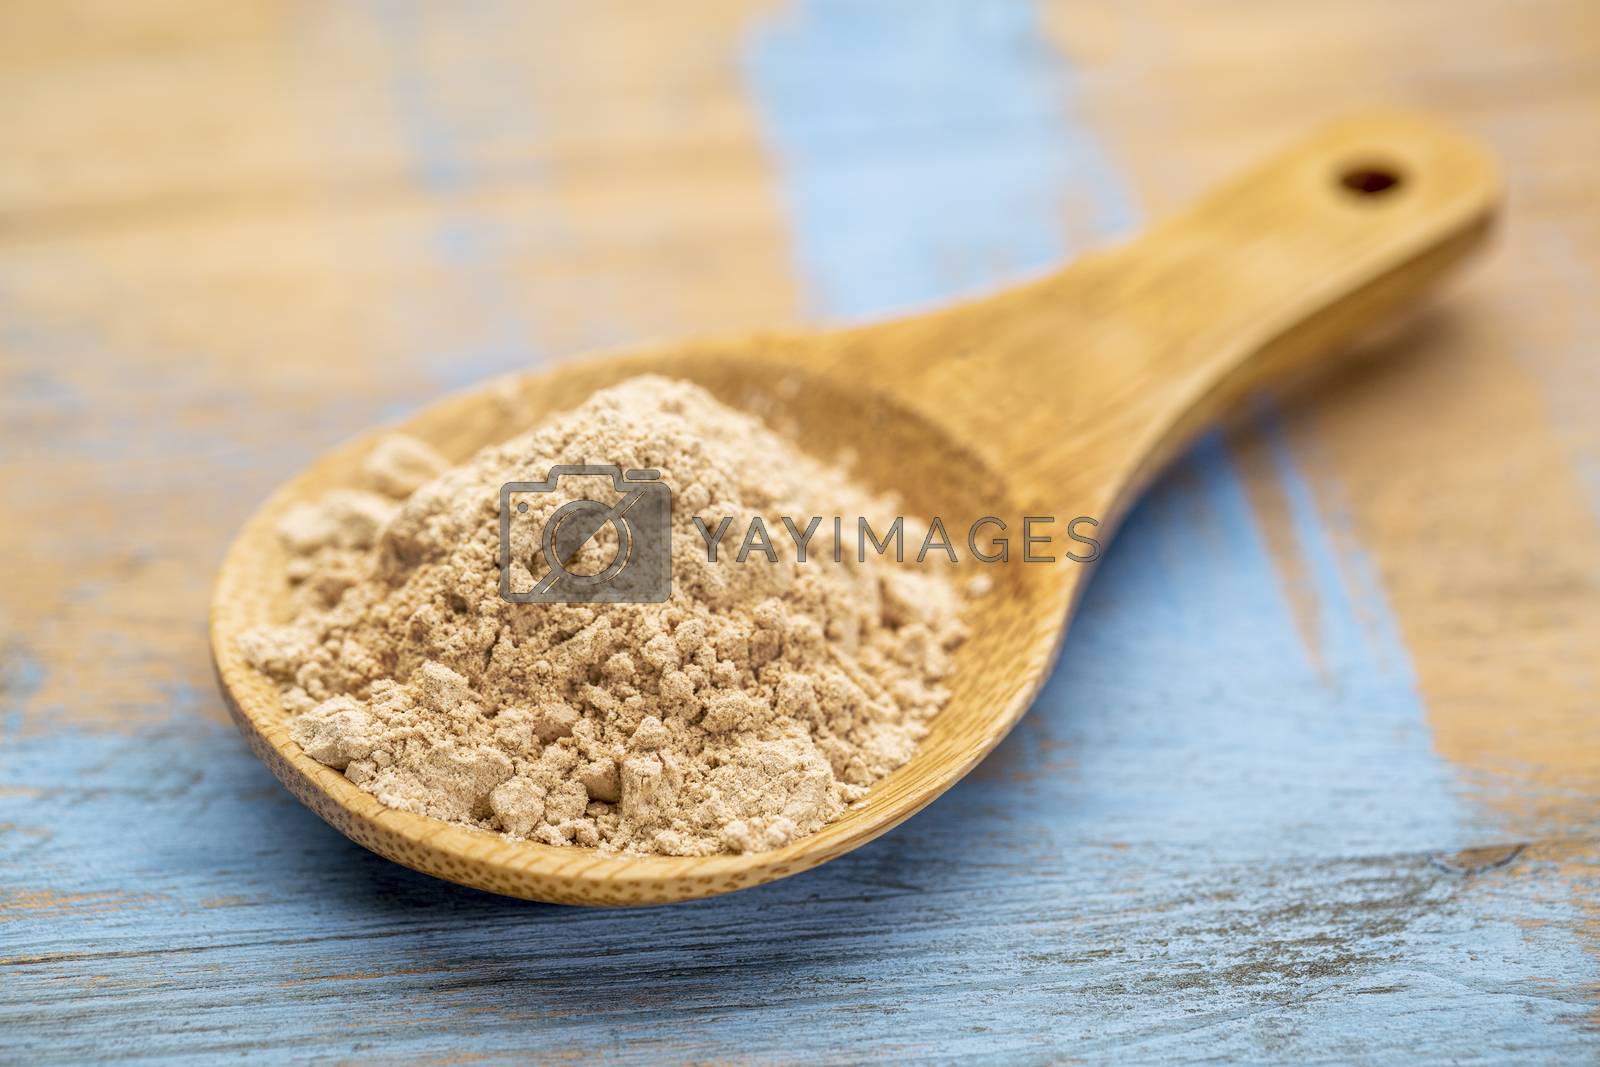 Royalty free image of red maca root powder  by PixelsAway